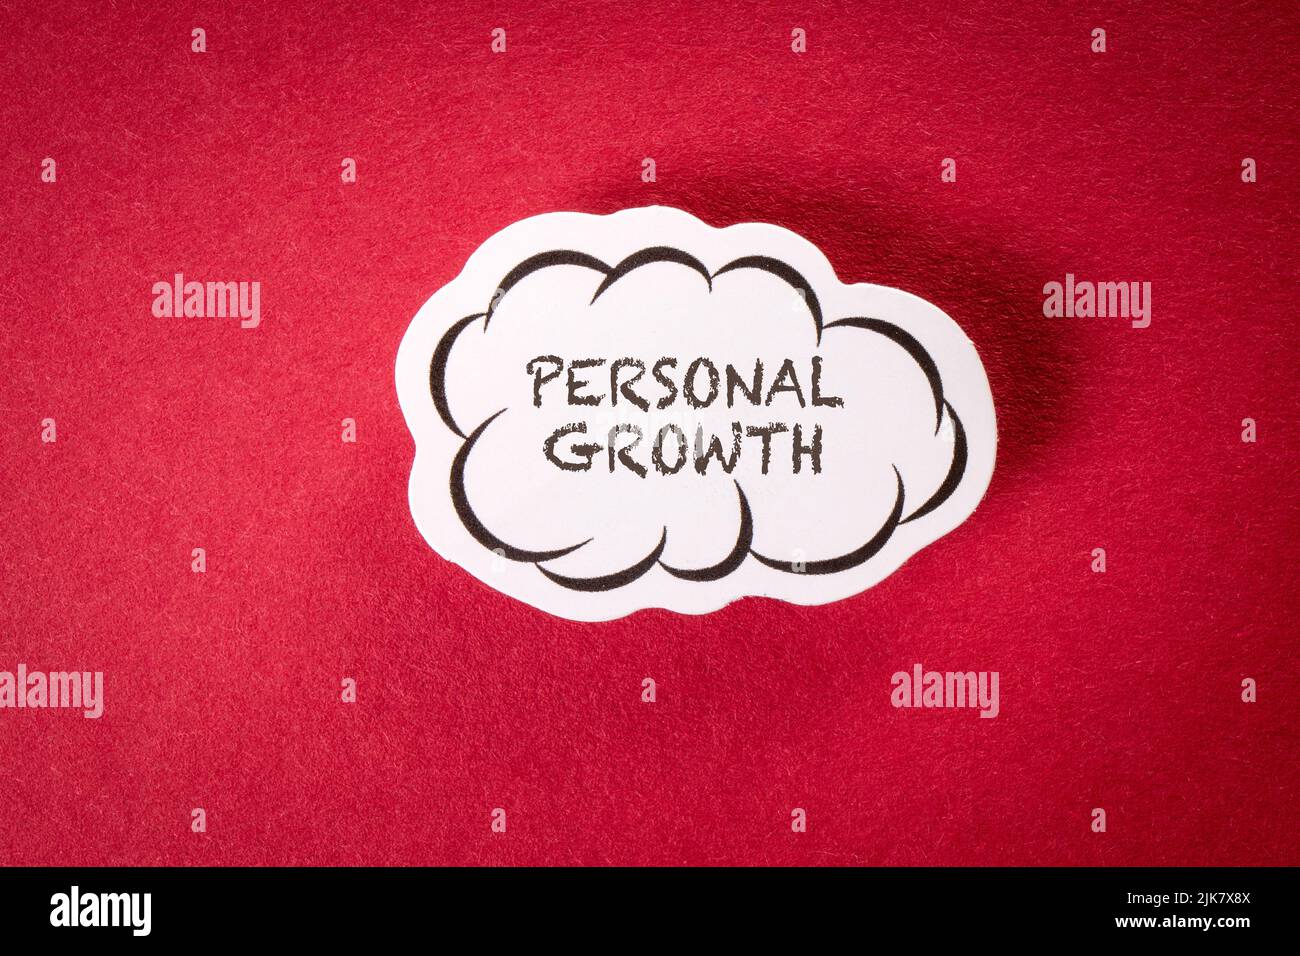 Personal Growth. Text in speech cloud on red background. Stock Photo